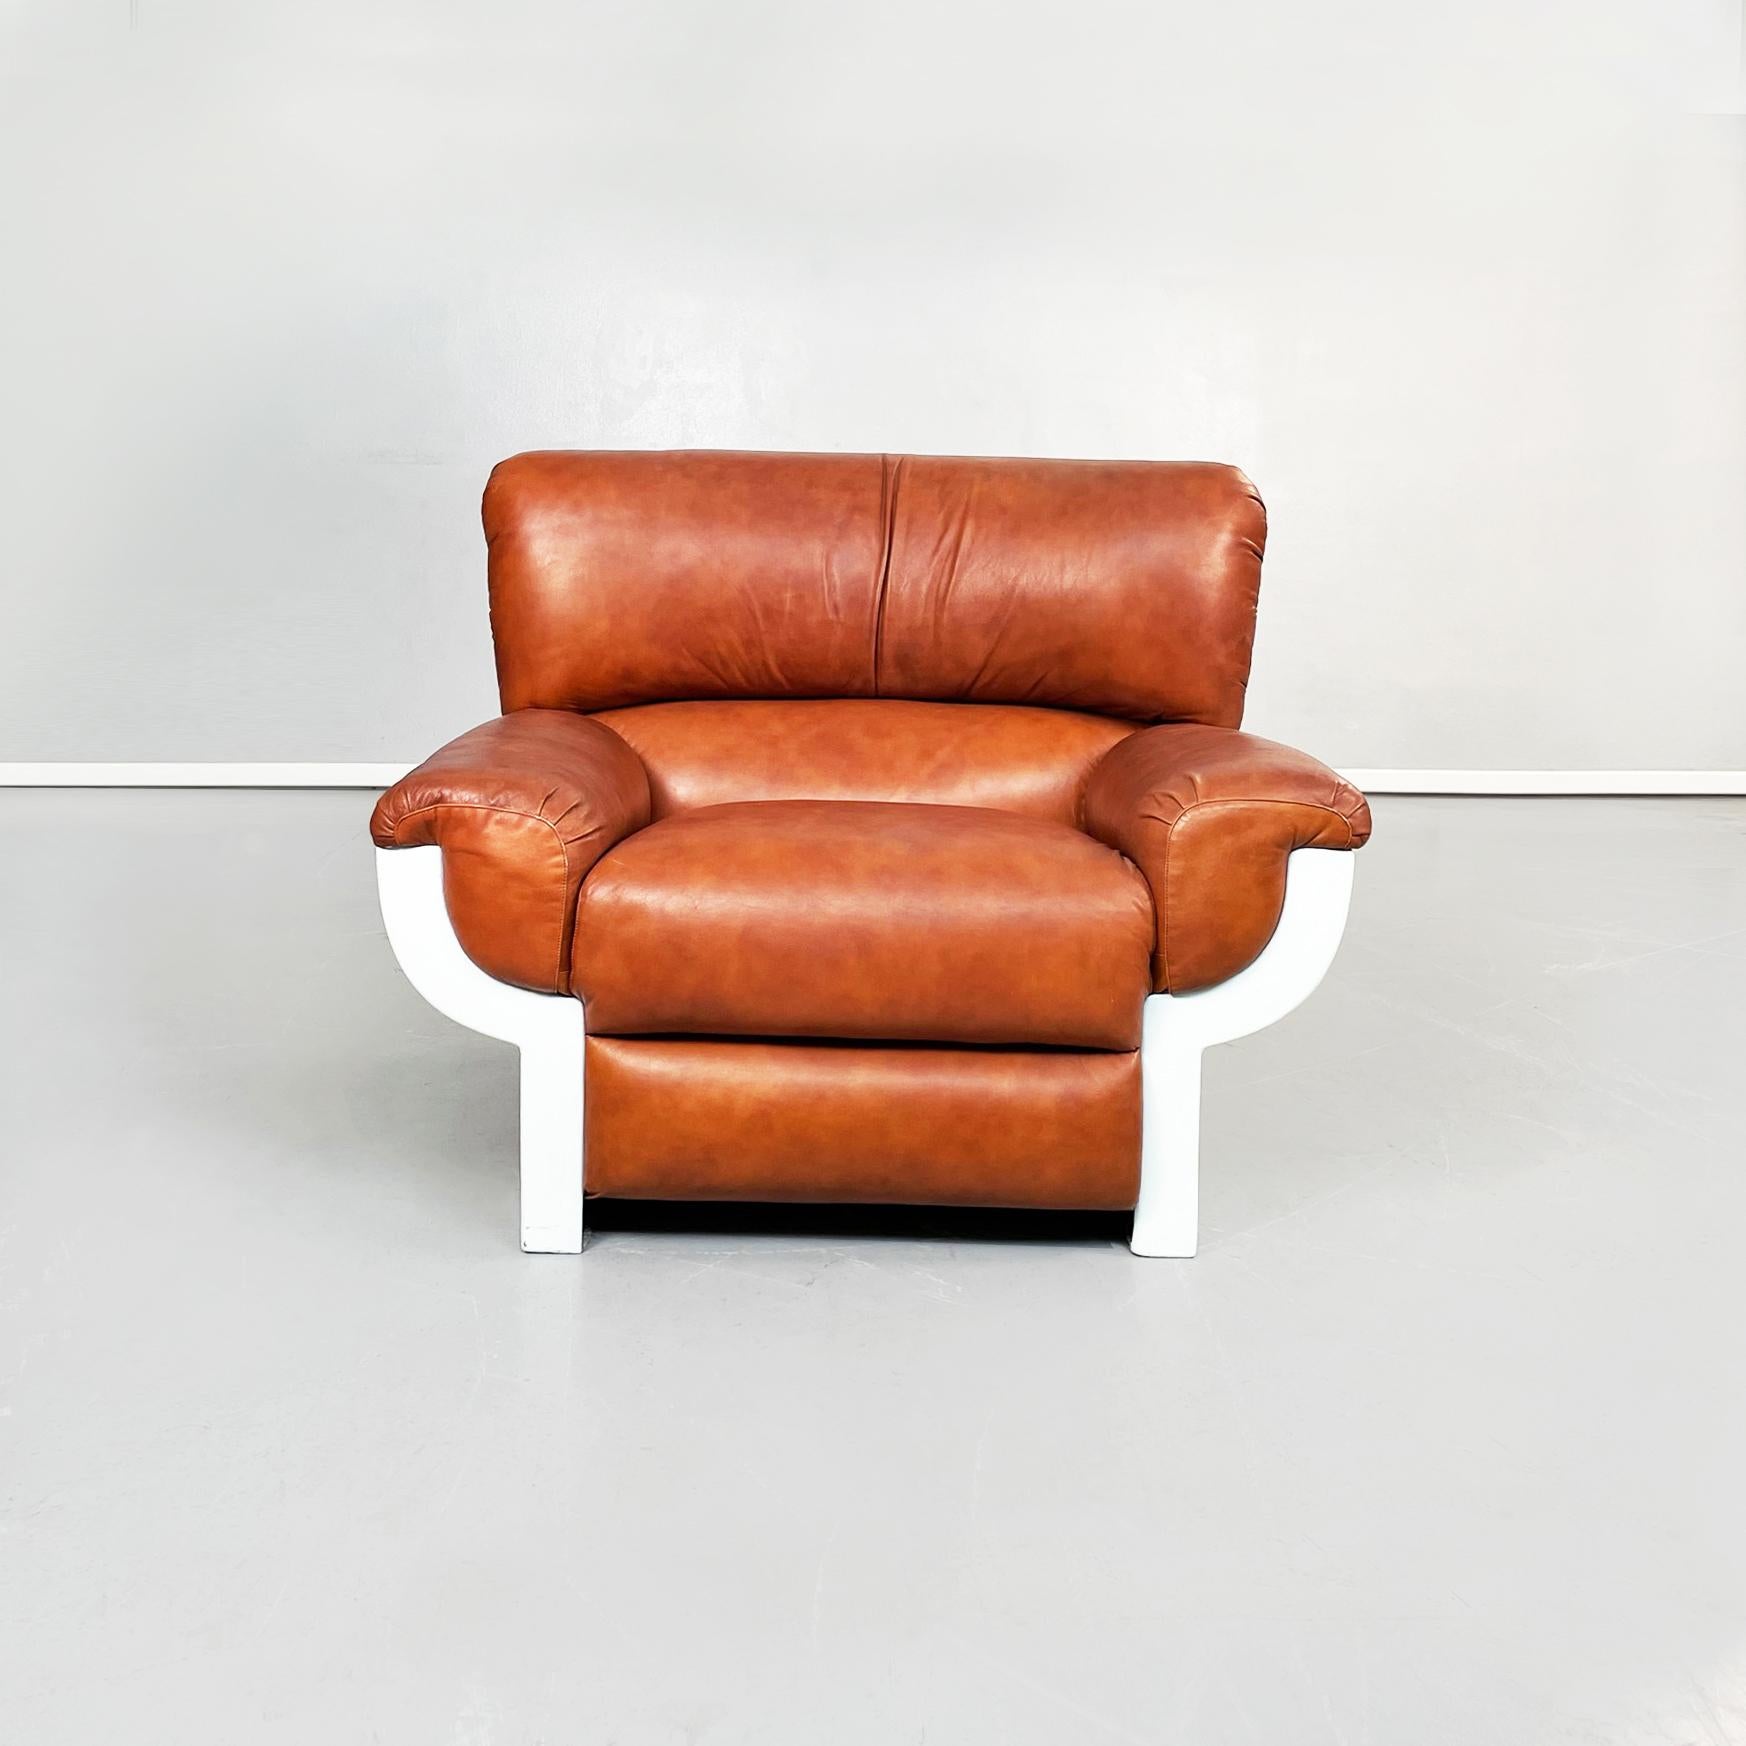 Italian mid-century brown leather and plastic armchairs Flou by Betti for Habitat Ids, 1970s
Pair of armchairs mod. Flou. The rectangular seat is made up of a padded cushion covered in cognac brown leather. The backrest, padded and upholstered in